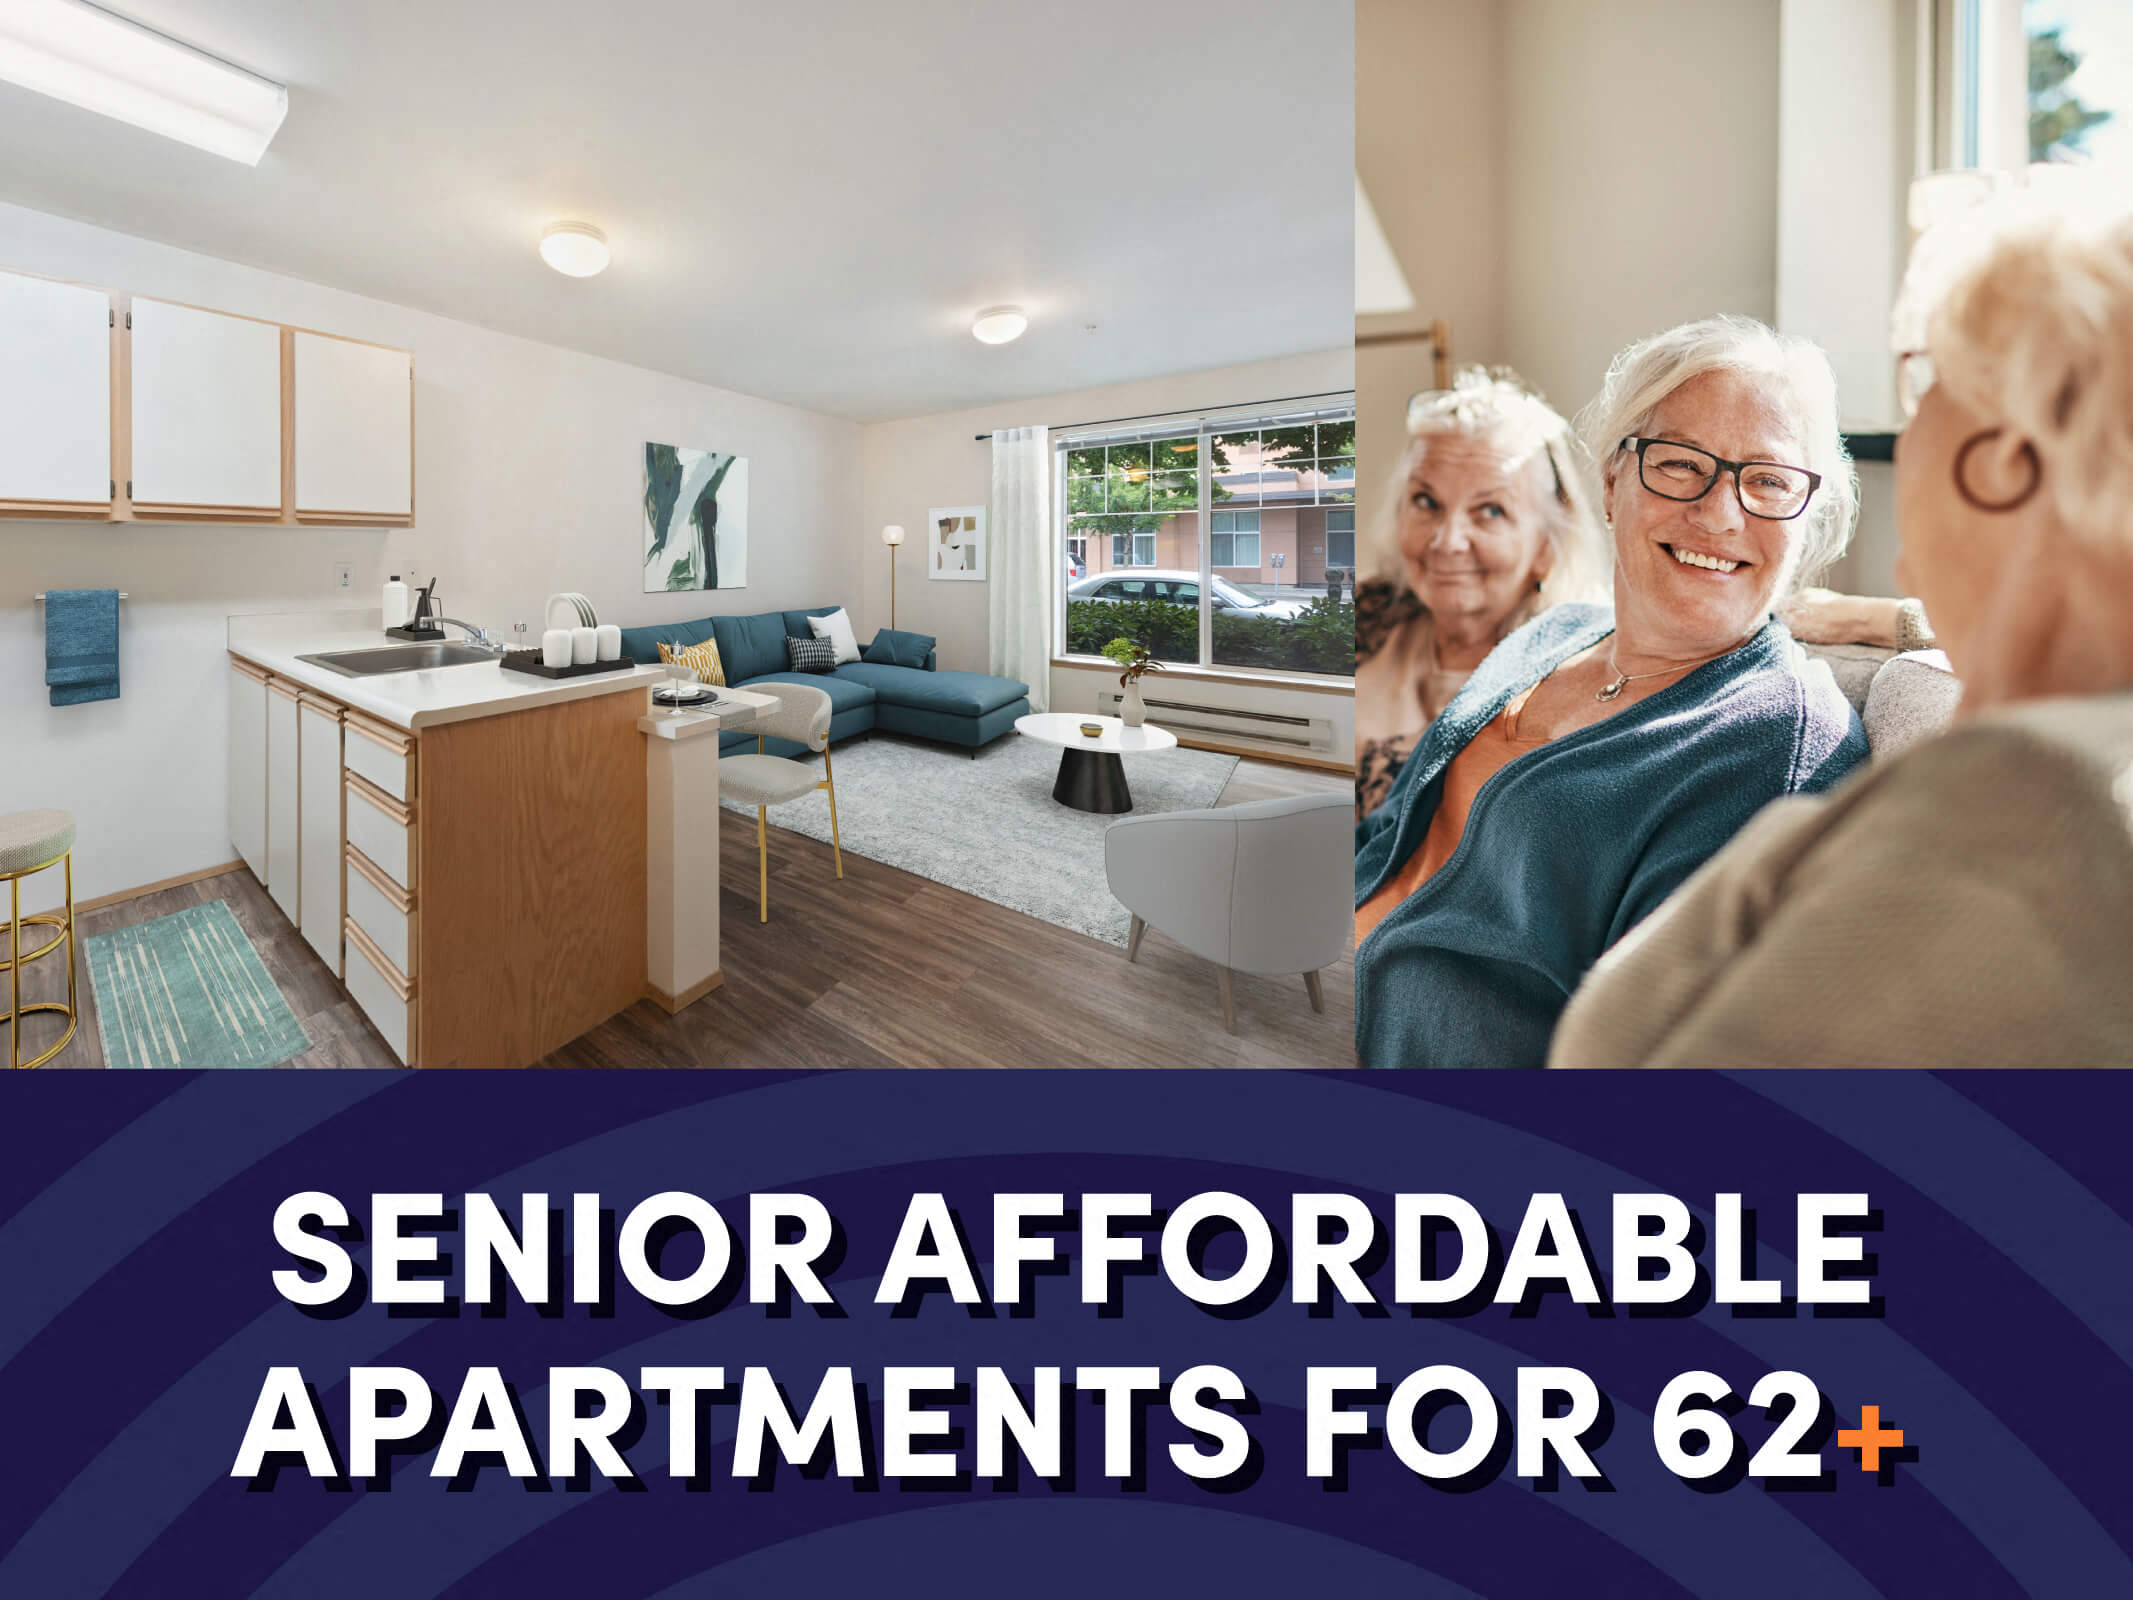 A kitchen looking over into the living room next to three seniors sitting side by side, above text that reads “Senior Affordable Apartments for 62+” for the Boardwalk Senior Affordable Apartments in Olympia, Washington.